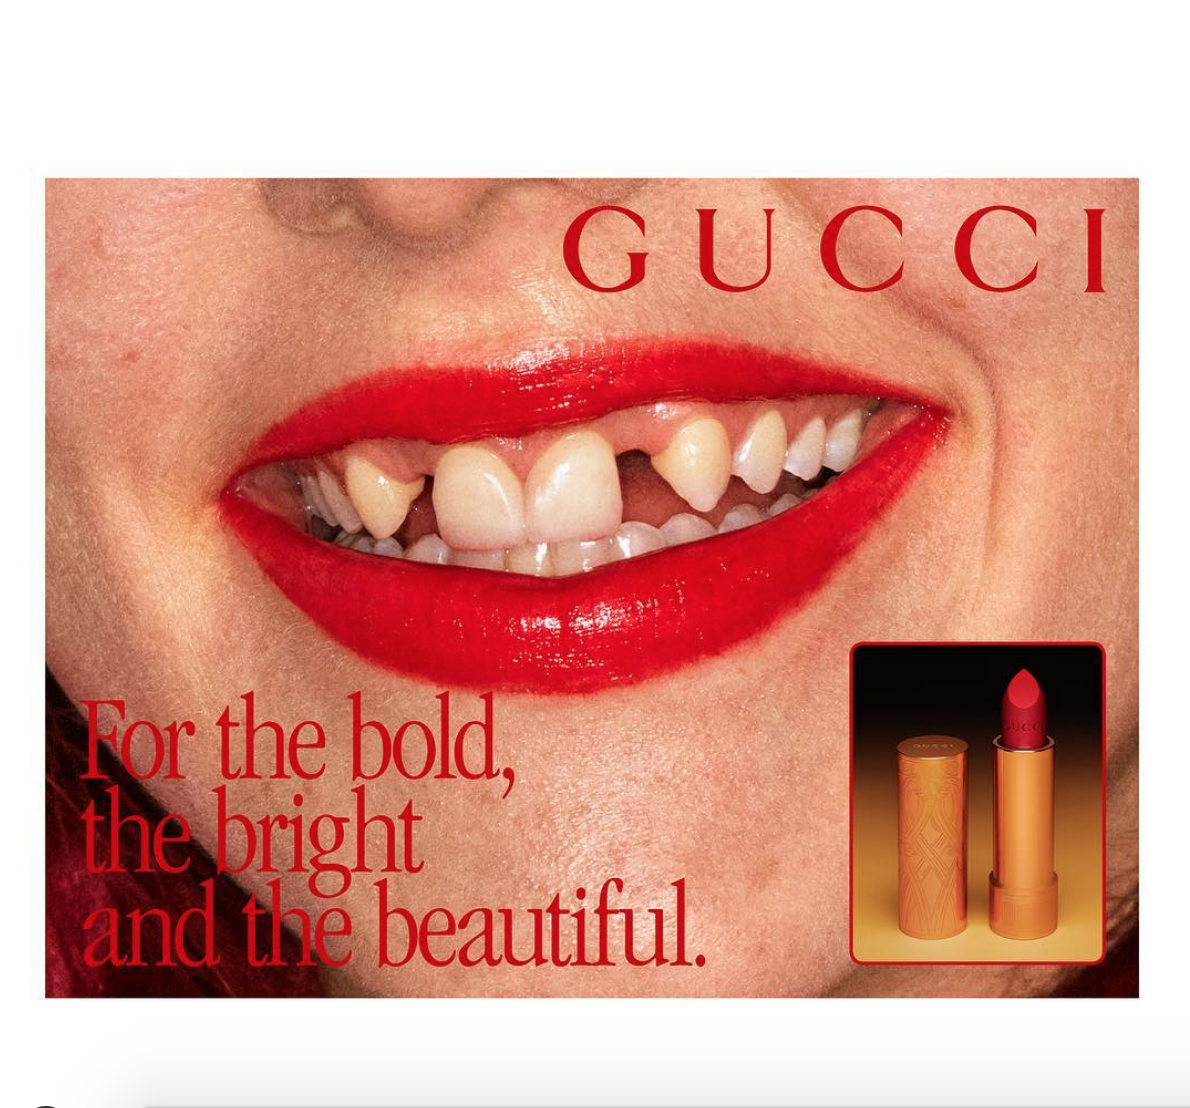 Accepting My Gucci Smile – Bridie Macdonald